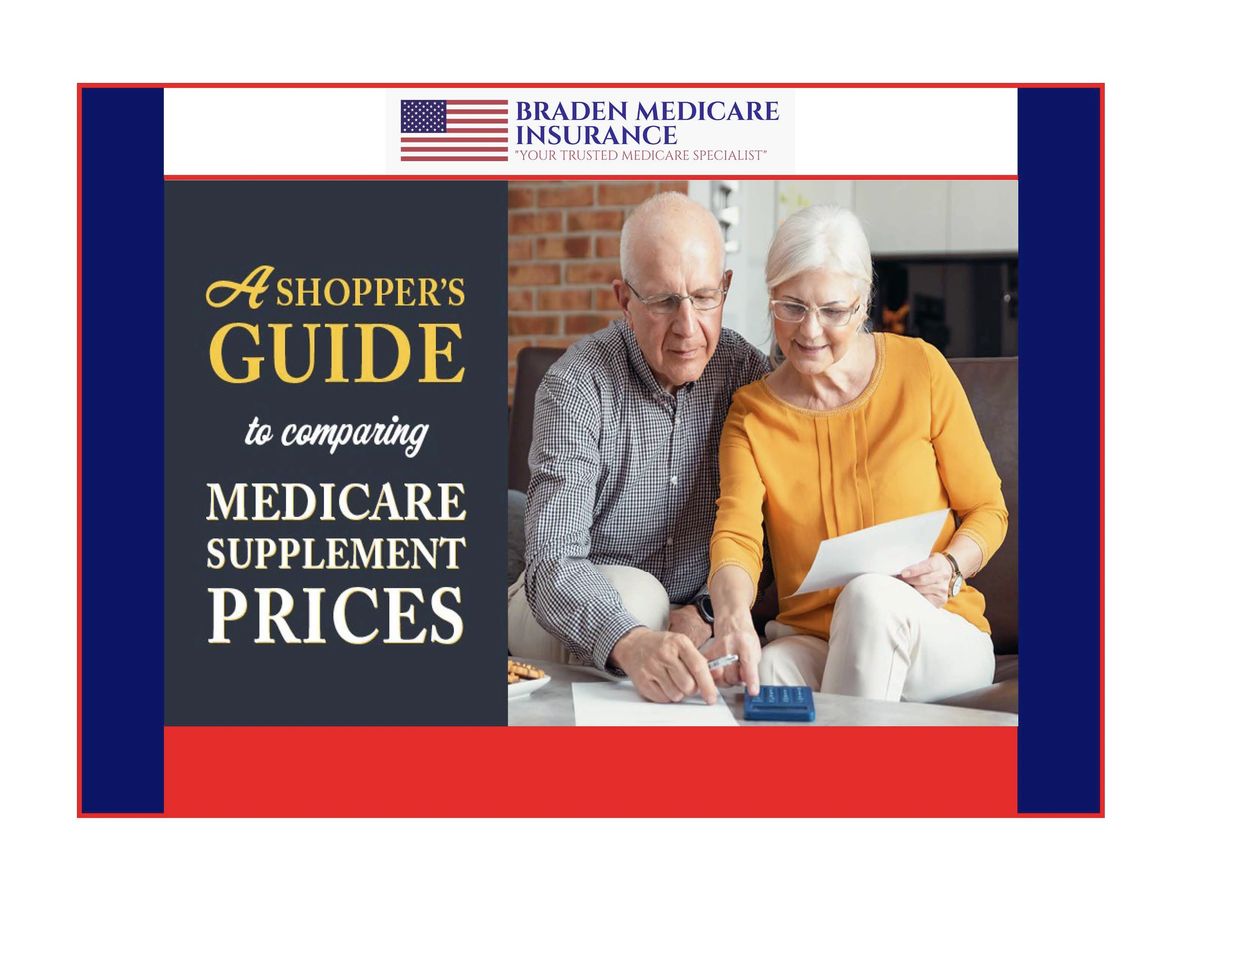 POster ABout How To Compare Medicare Supplement Prices # Medigap Comparisons #Medicare Supplements